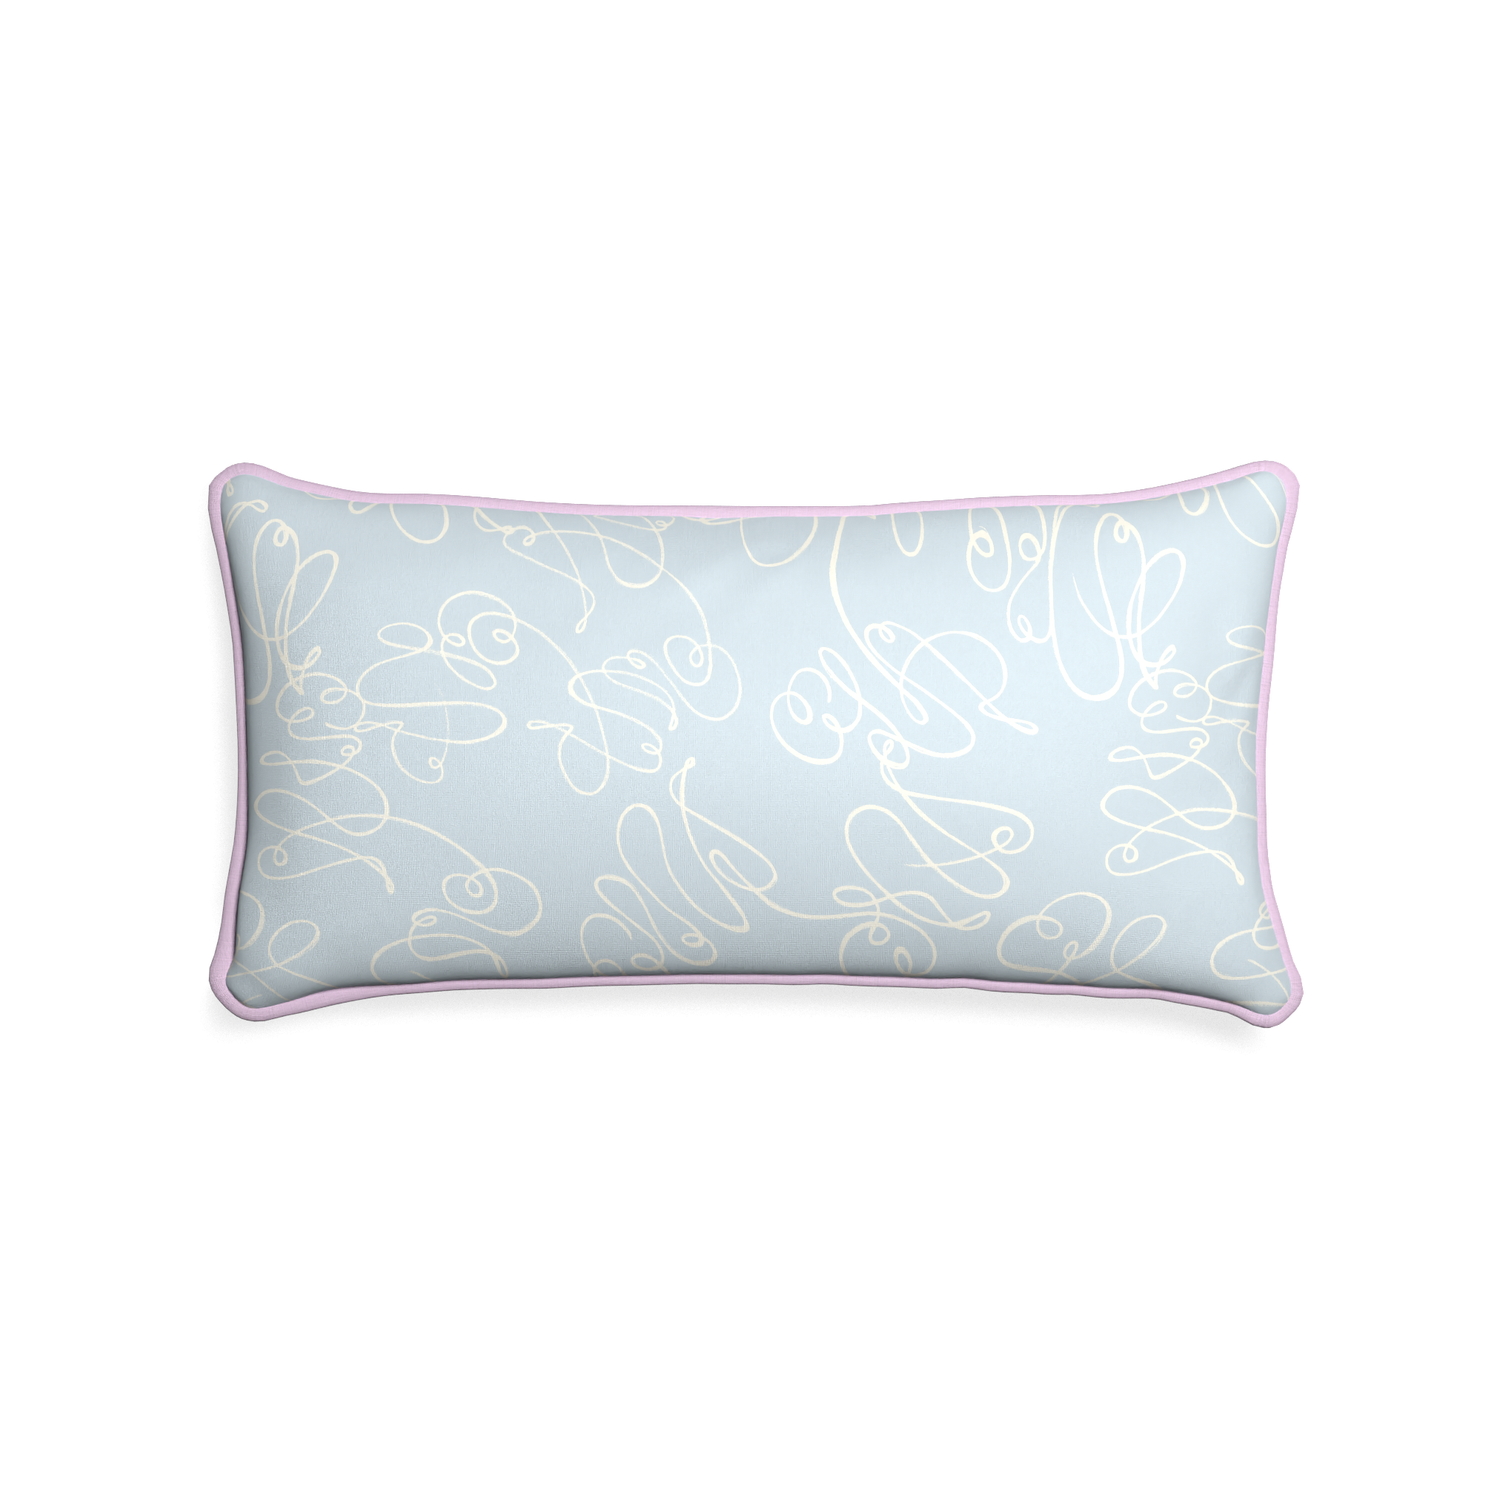 Midi-lumbar mirabella custom powder blue abstractpillow with l piping on white background